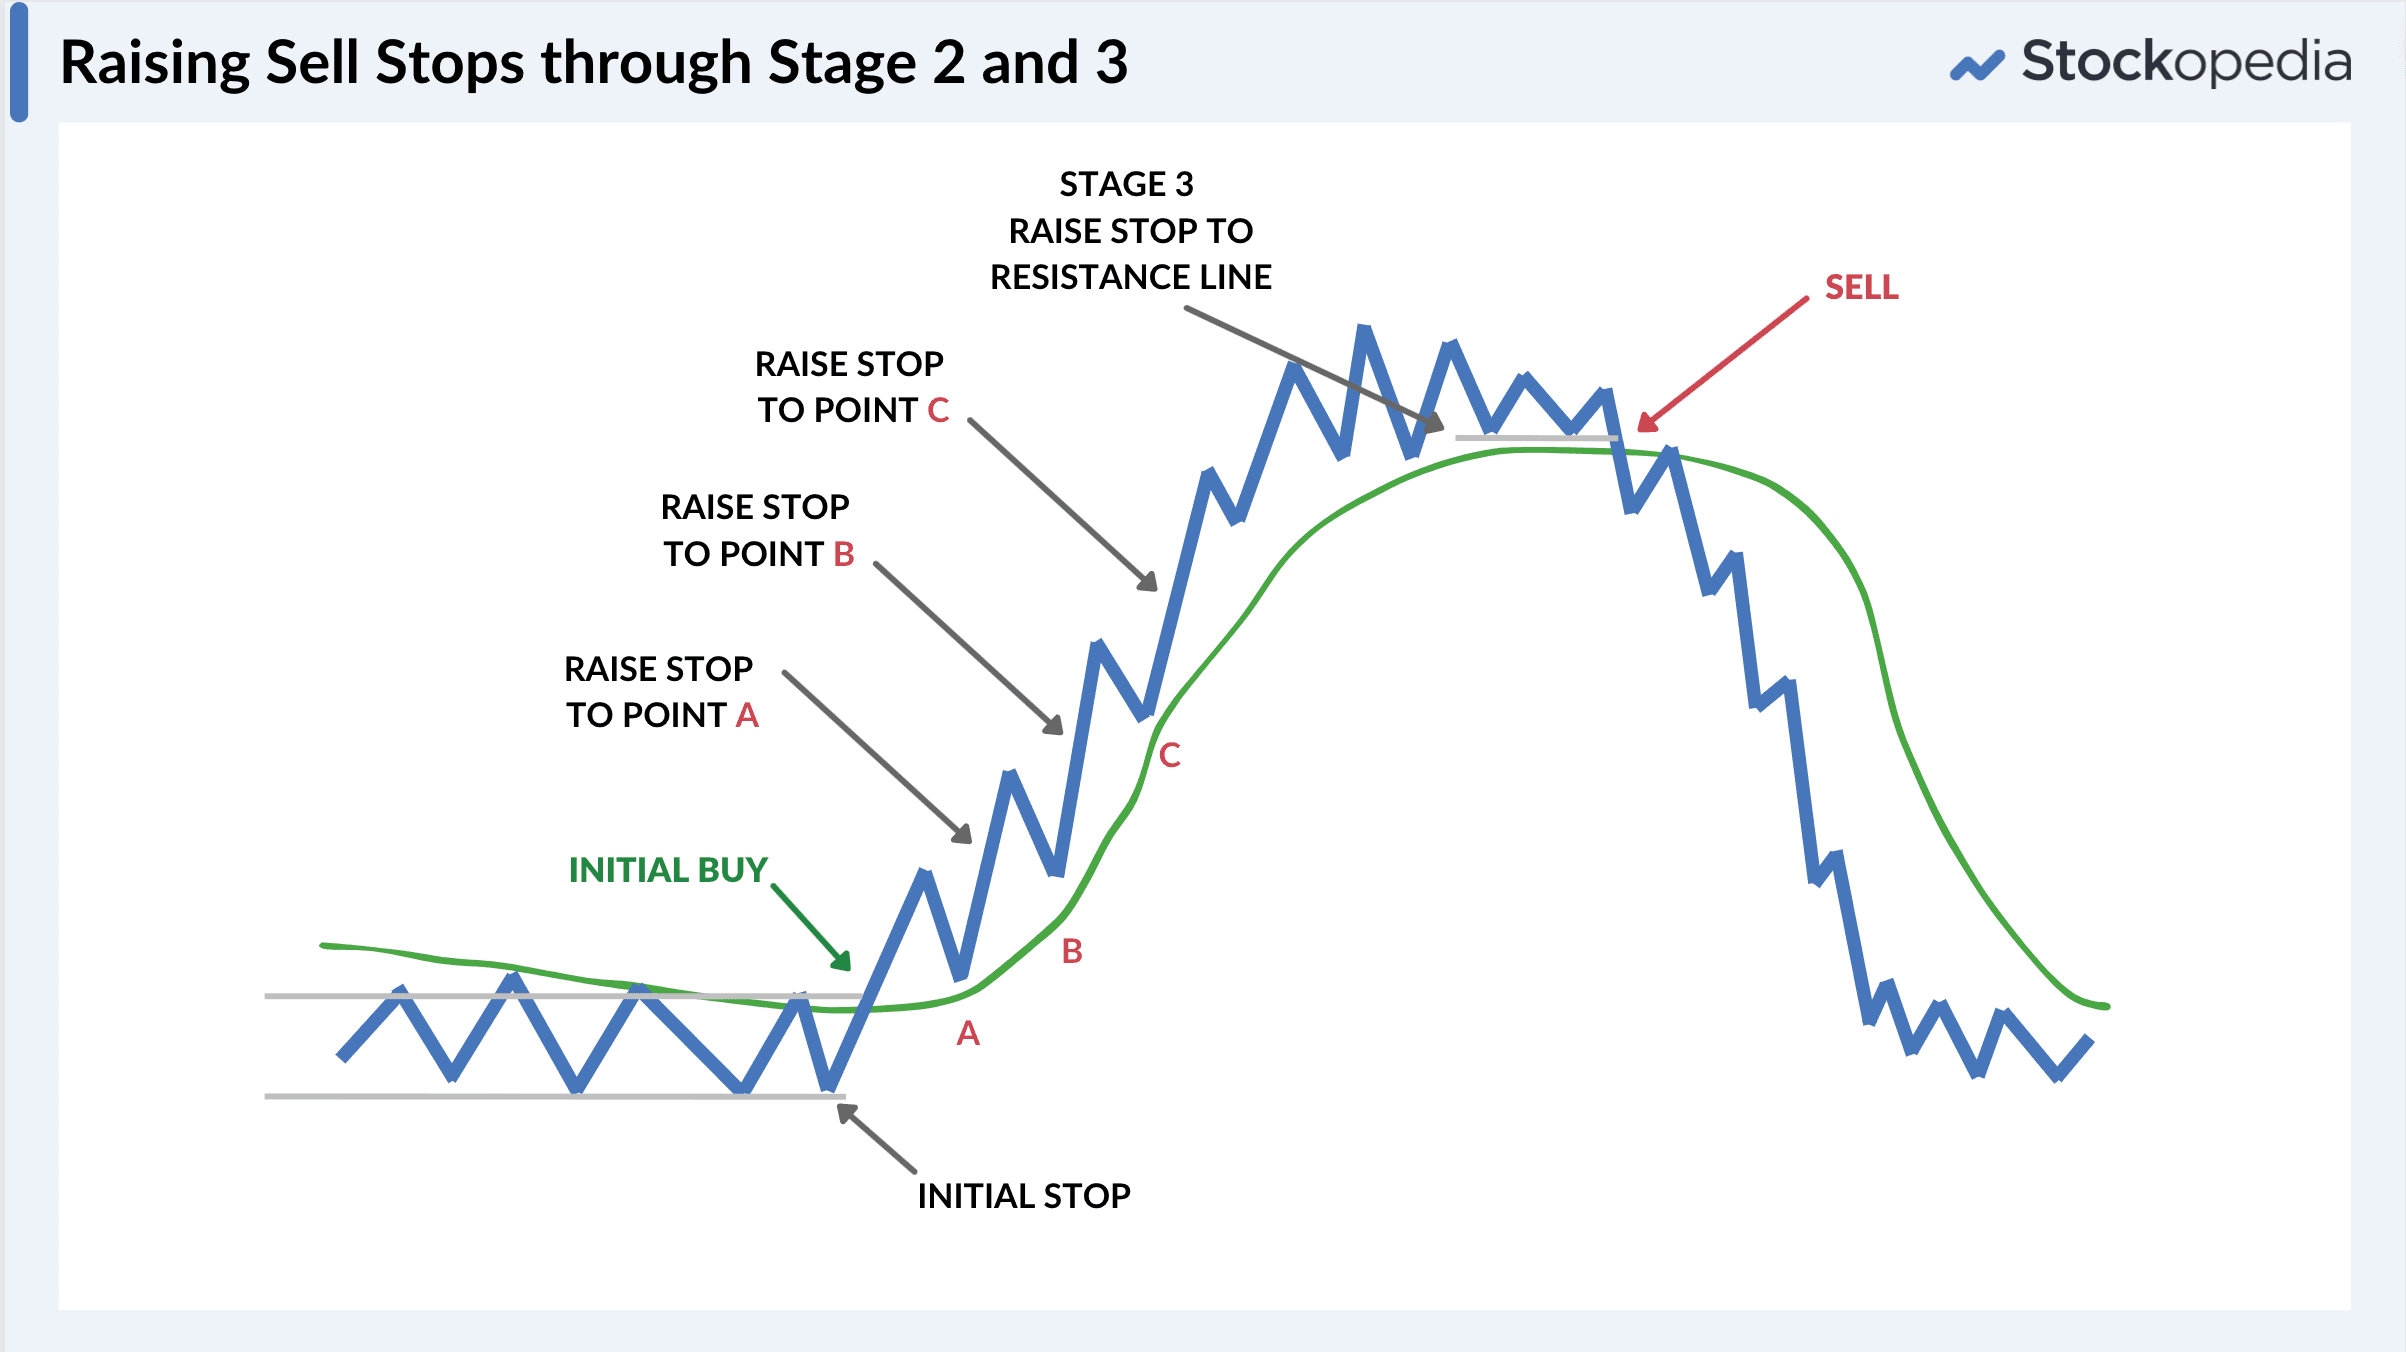 Graphic - Stan Weinstein - Raising sell stops through stage 2 and 3